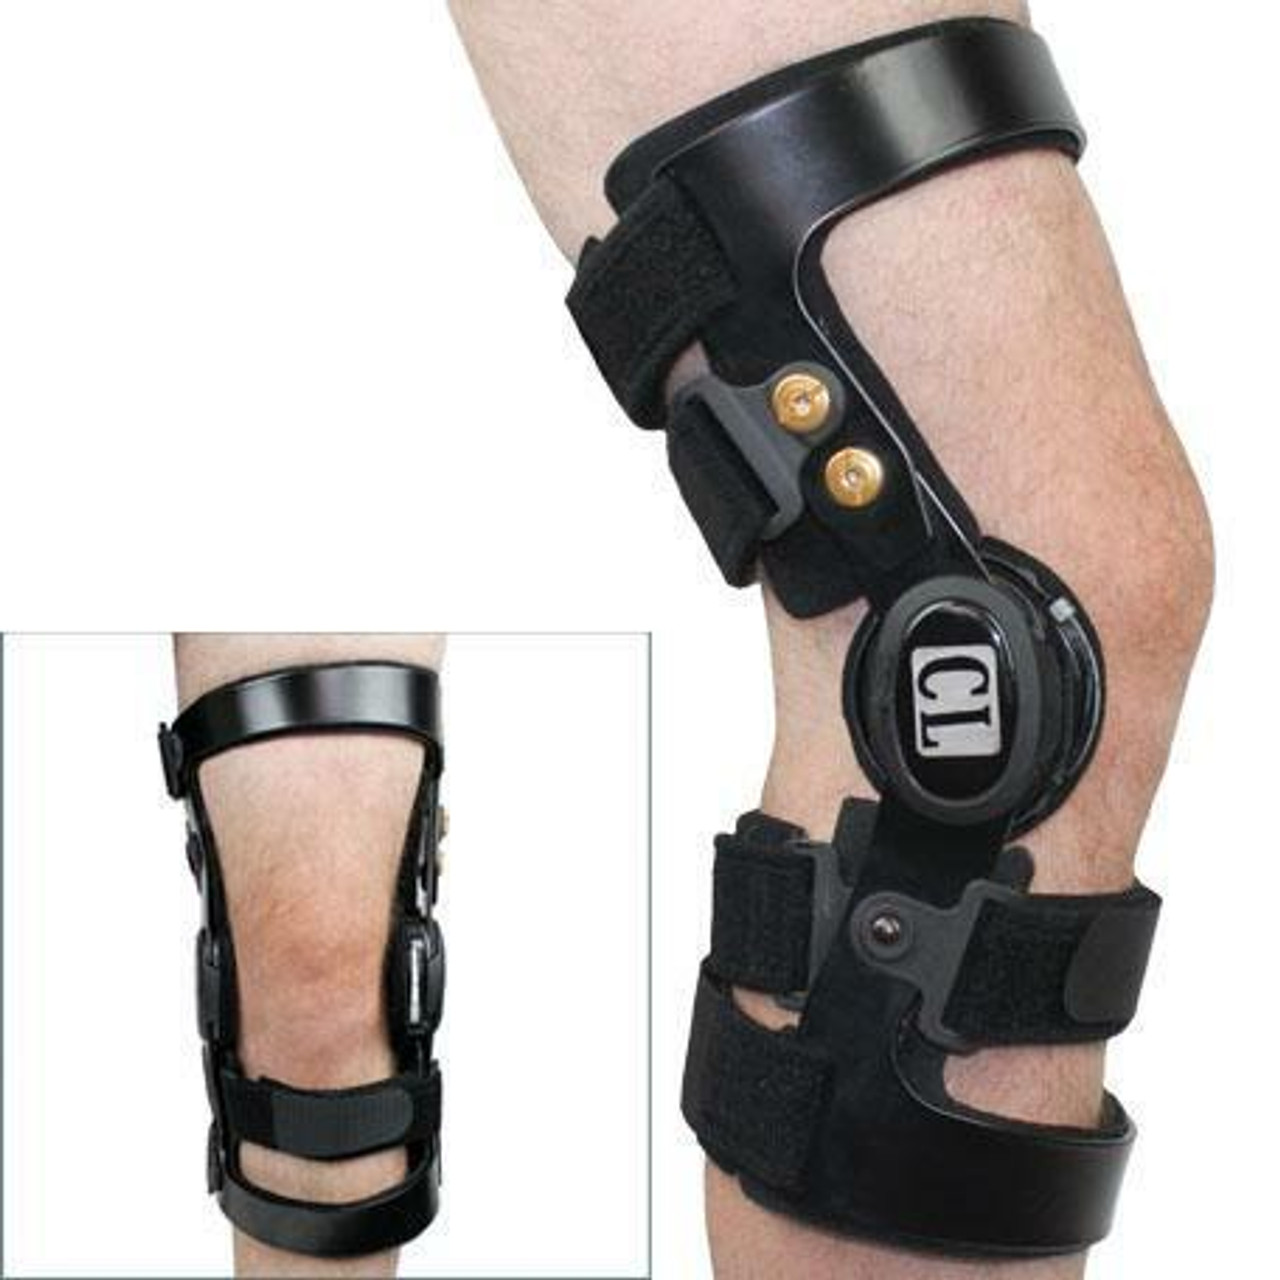 Functional Knee Stabilizer Knee Support, 15 To 75 Years, Sizes